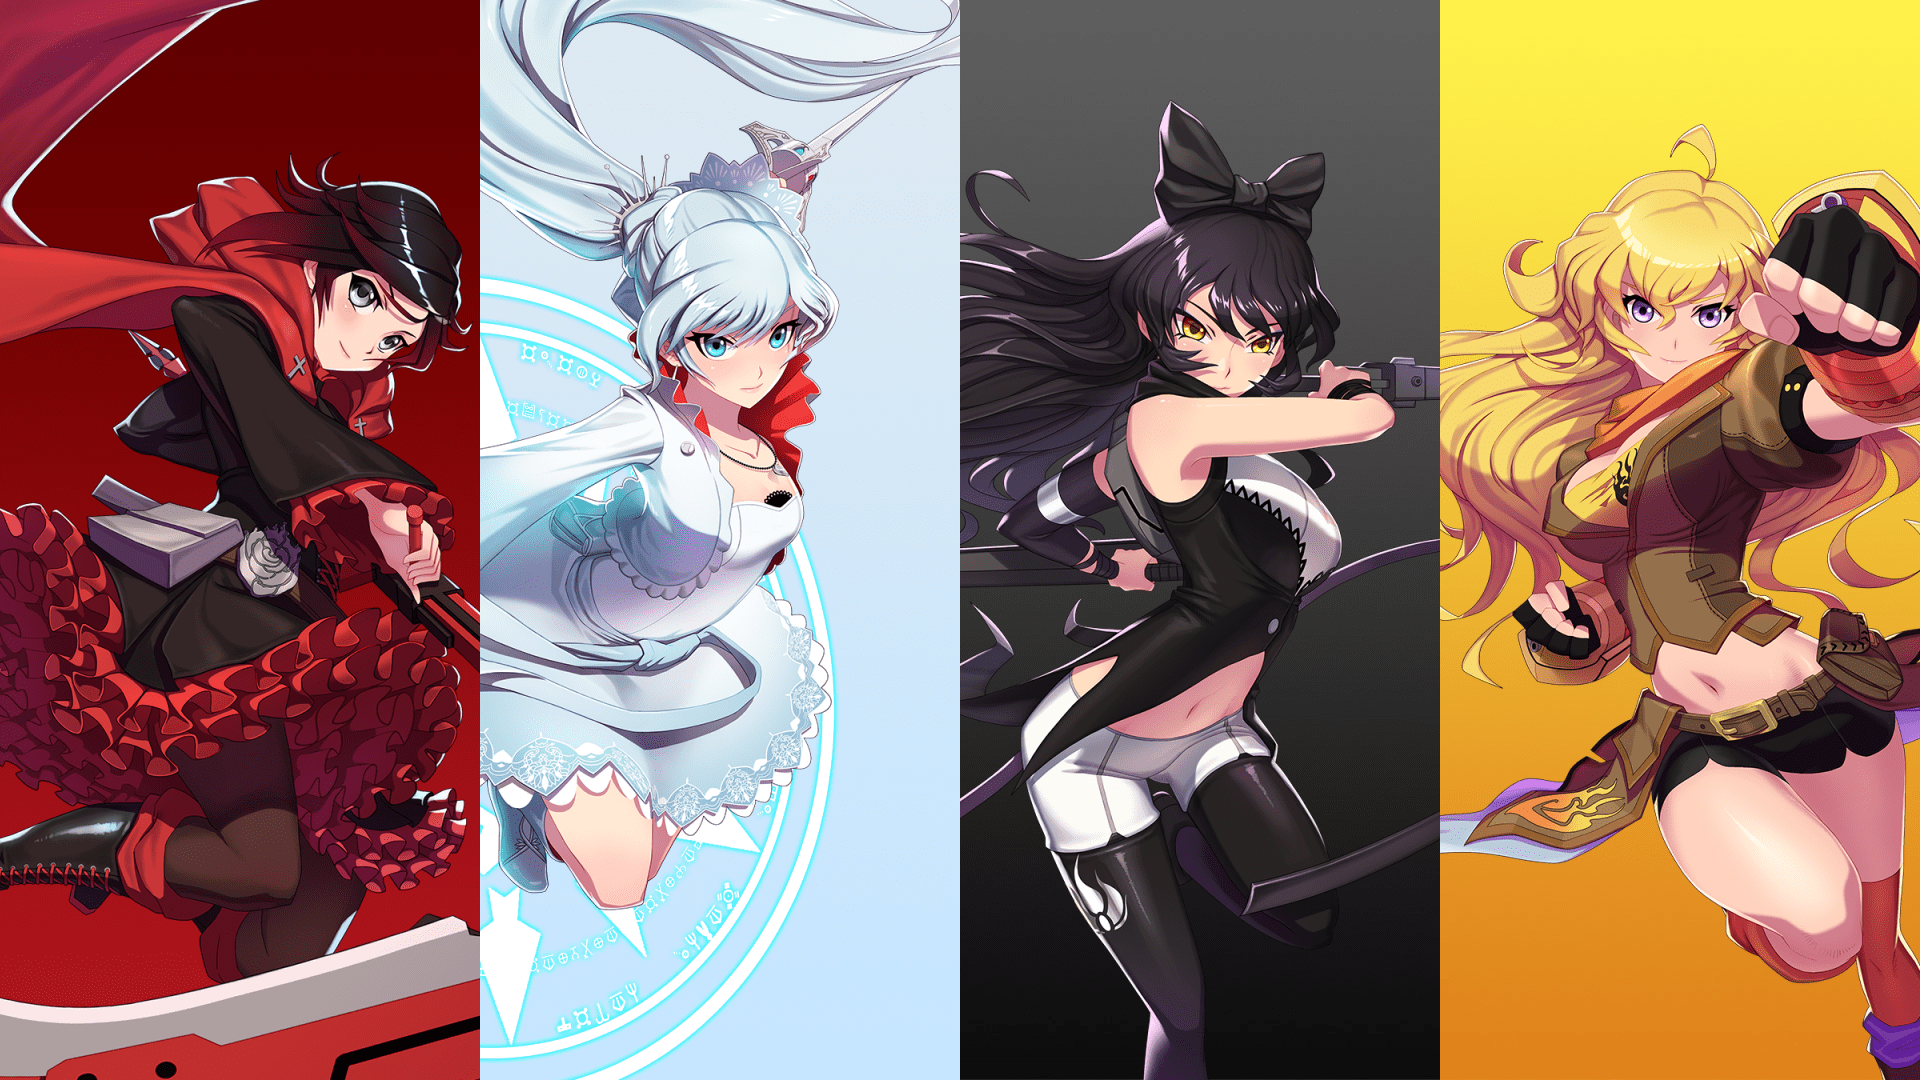 RWBY: Amity Arena is out today for iOS and Android